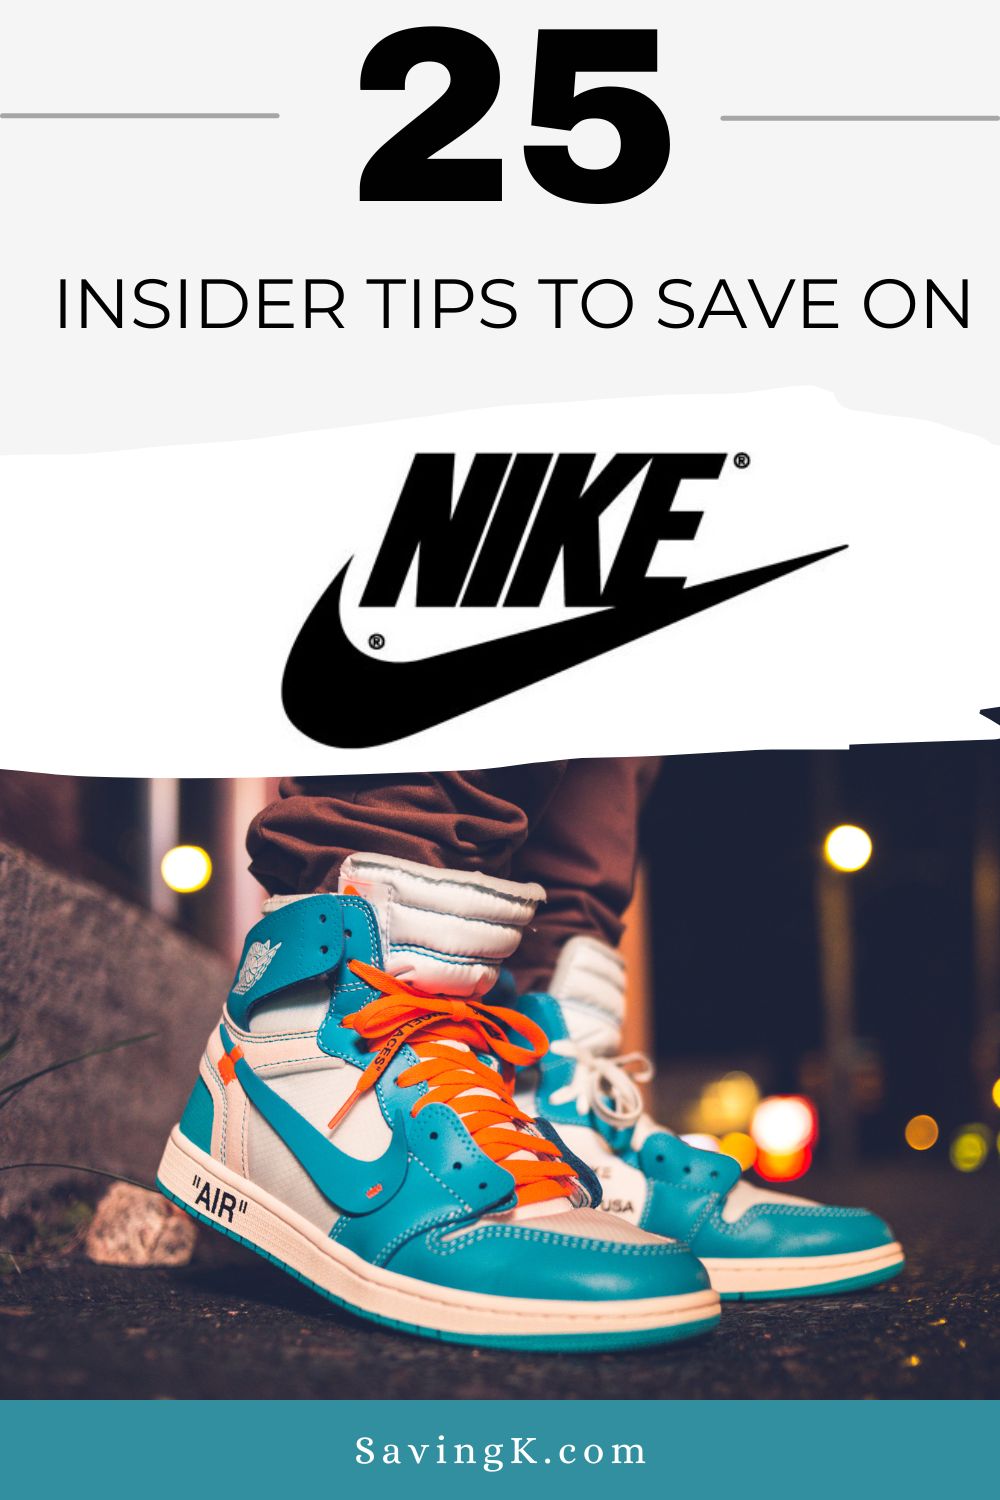 Maximize your style and savings: 25 insider tips for Nike store shopping to save on gear.